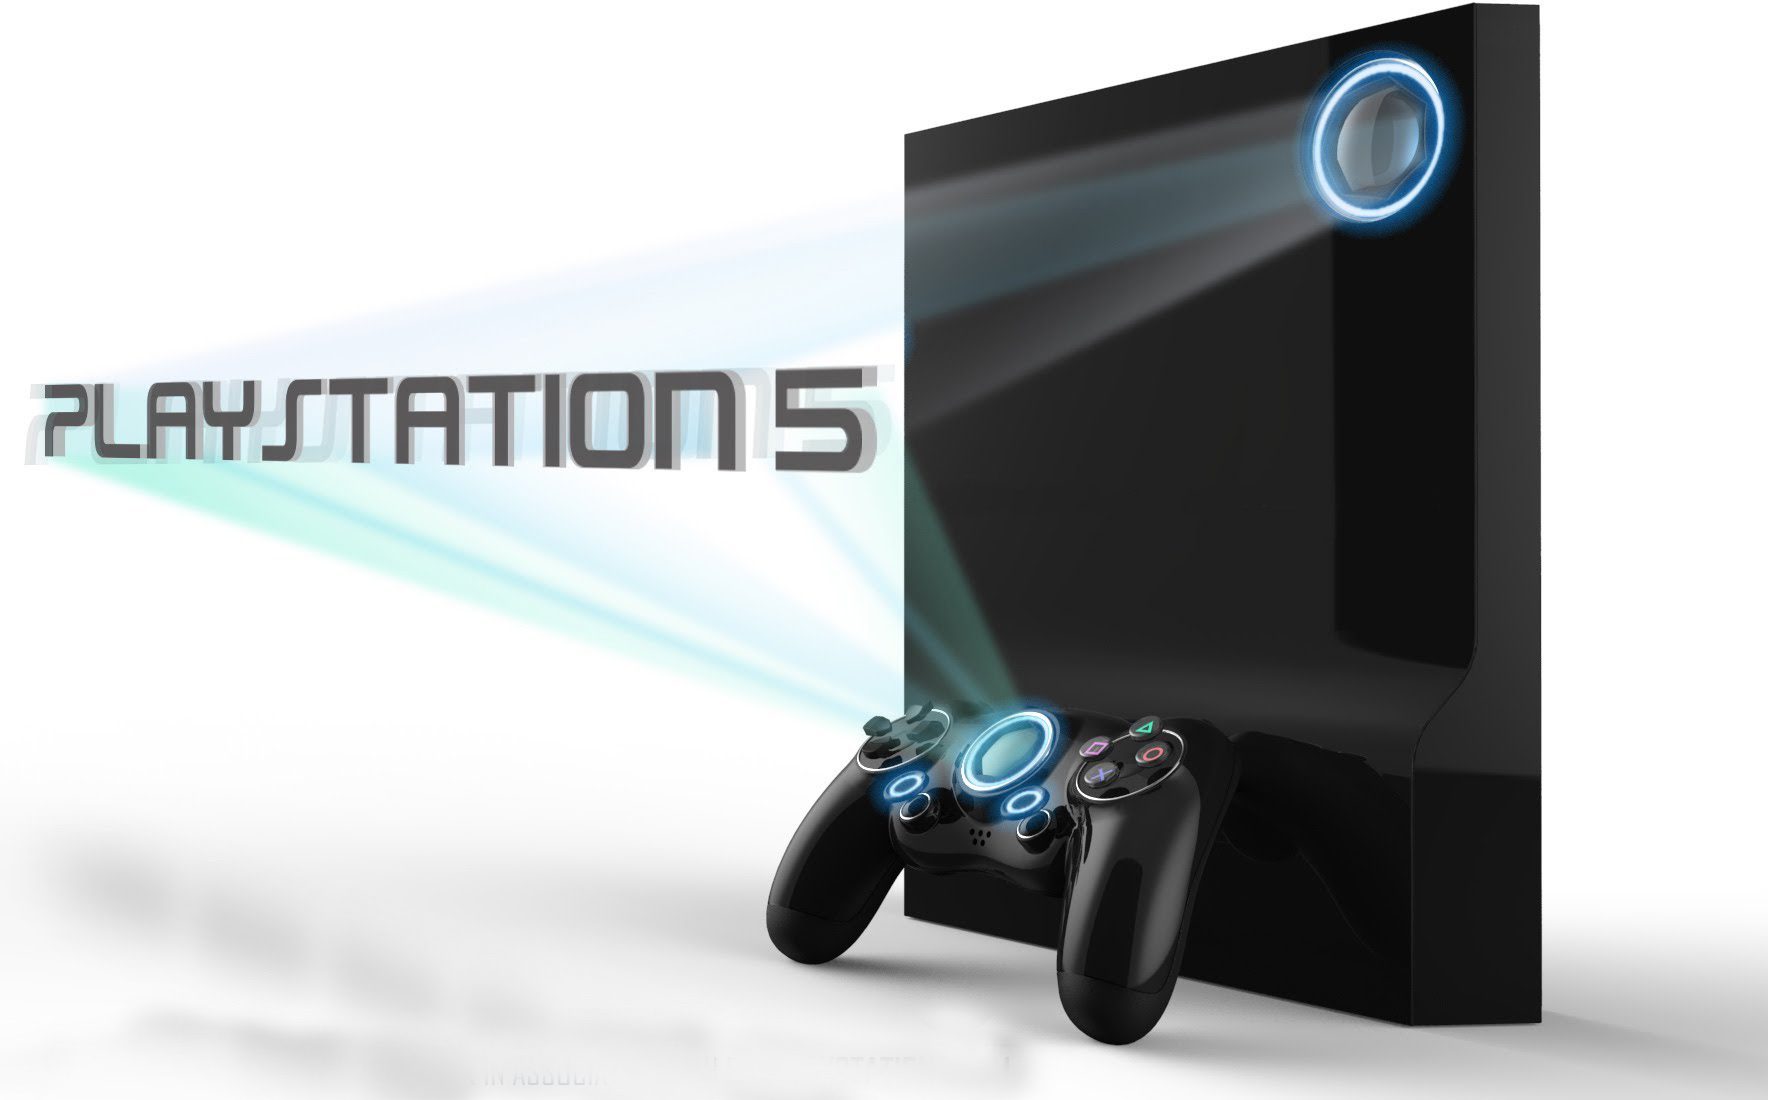 Sony PLAYSTATION 5. Ps5 Concept 2015. Sony PLAYSTATION 5 игры. PLAYSTATION 5 картинки. Пс 5 12